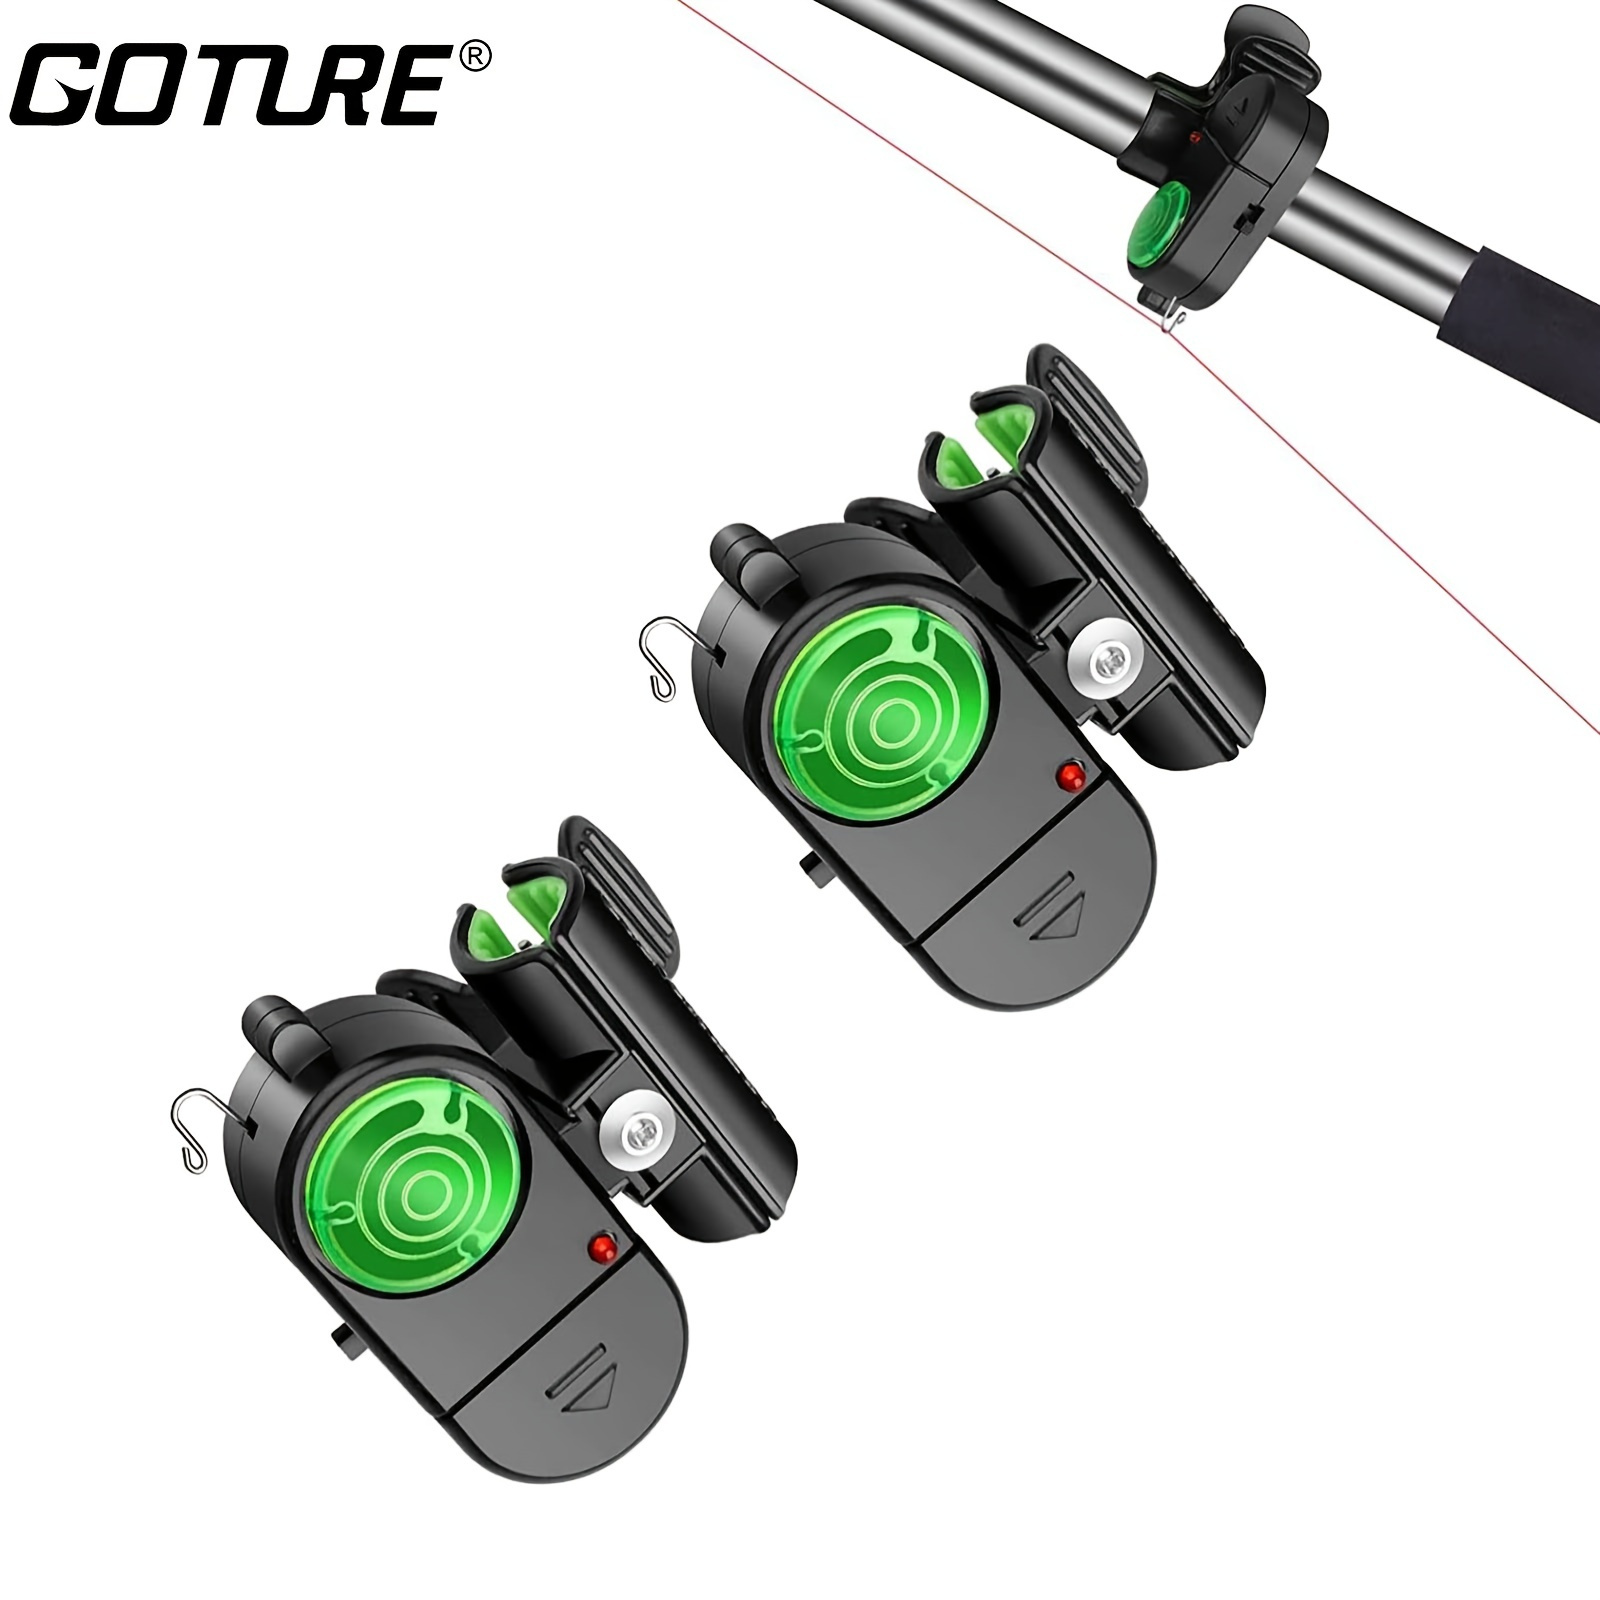 Catch More Fish With The Goture Sensitive Electronic Fishing Alert